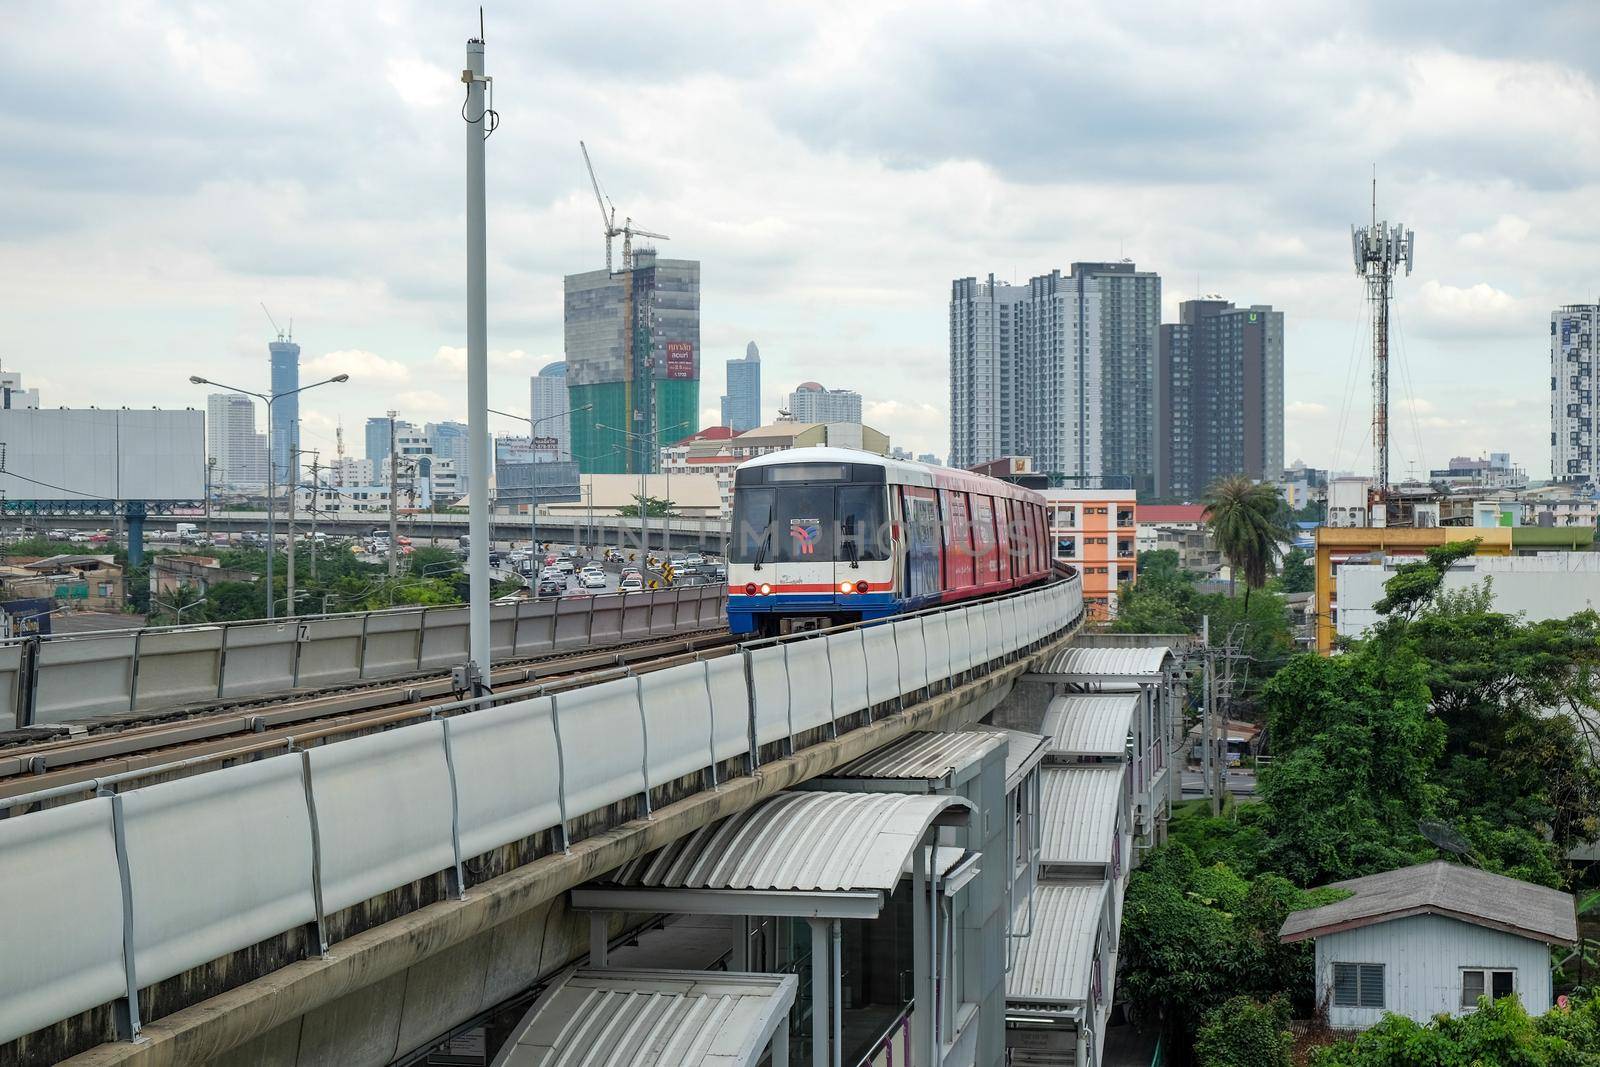 Bangkok-Thailand NOV 9 2017: BTS Sky train mass transit system in Bangkok to help facilitate and speed the journey. by Chiradech